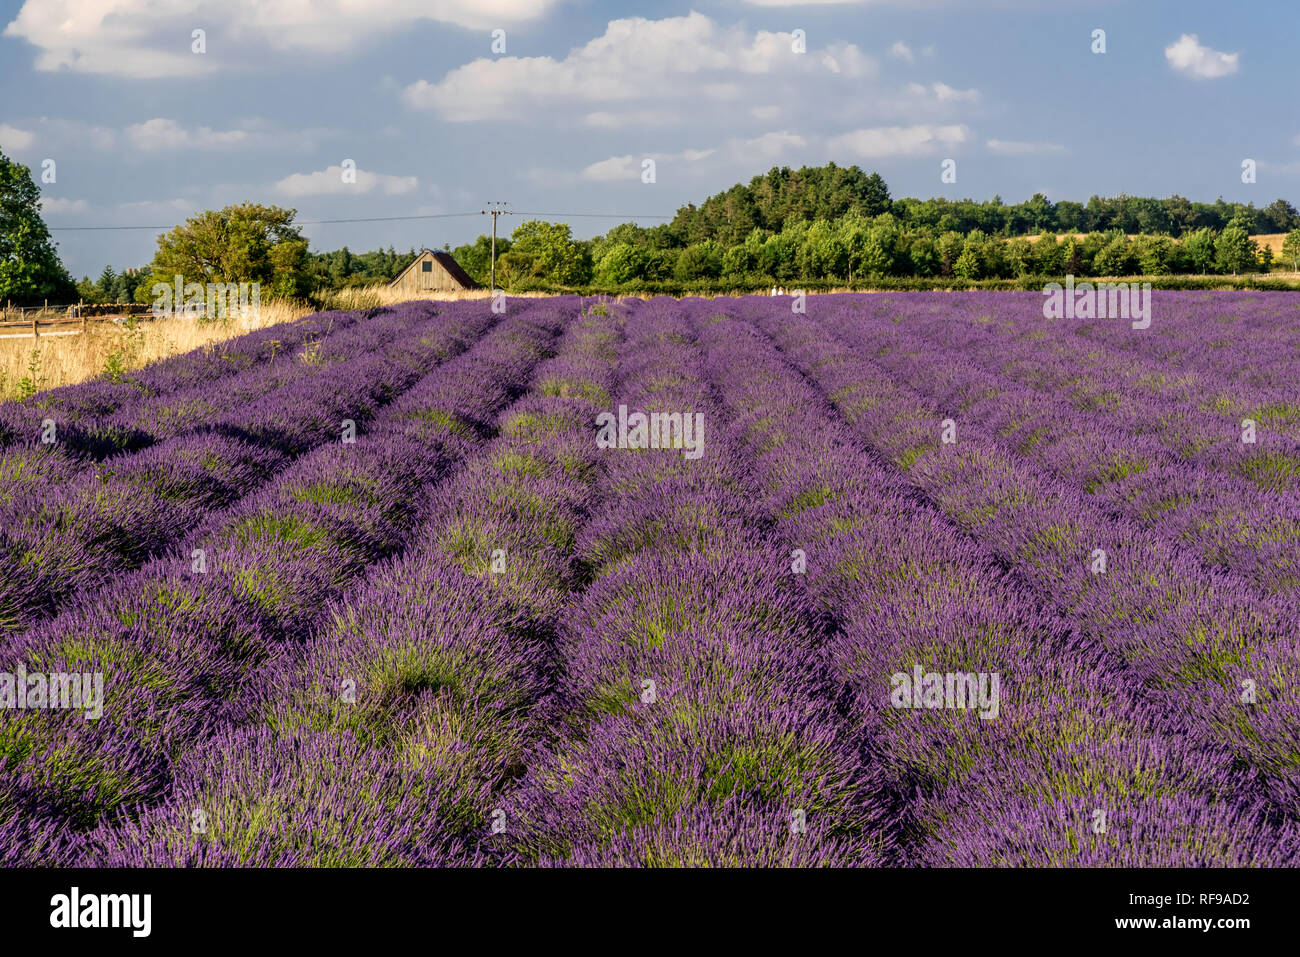 Field of lavender ready to harvest Stock Photo